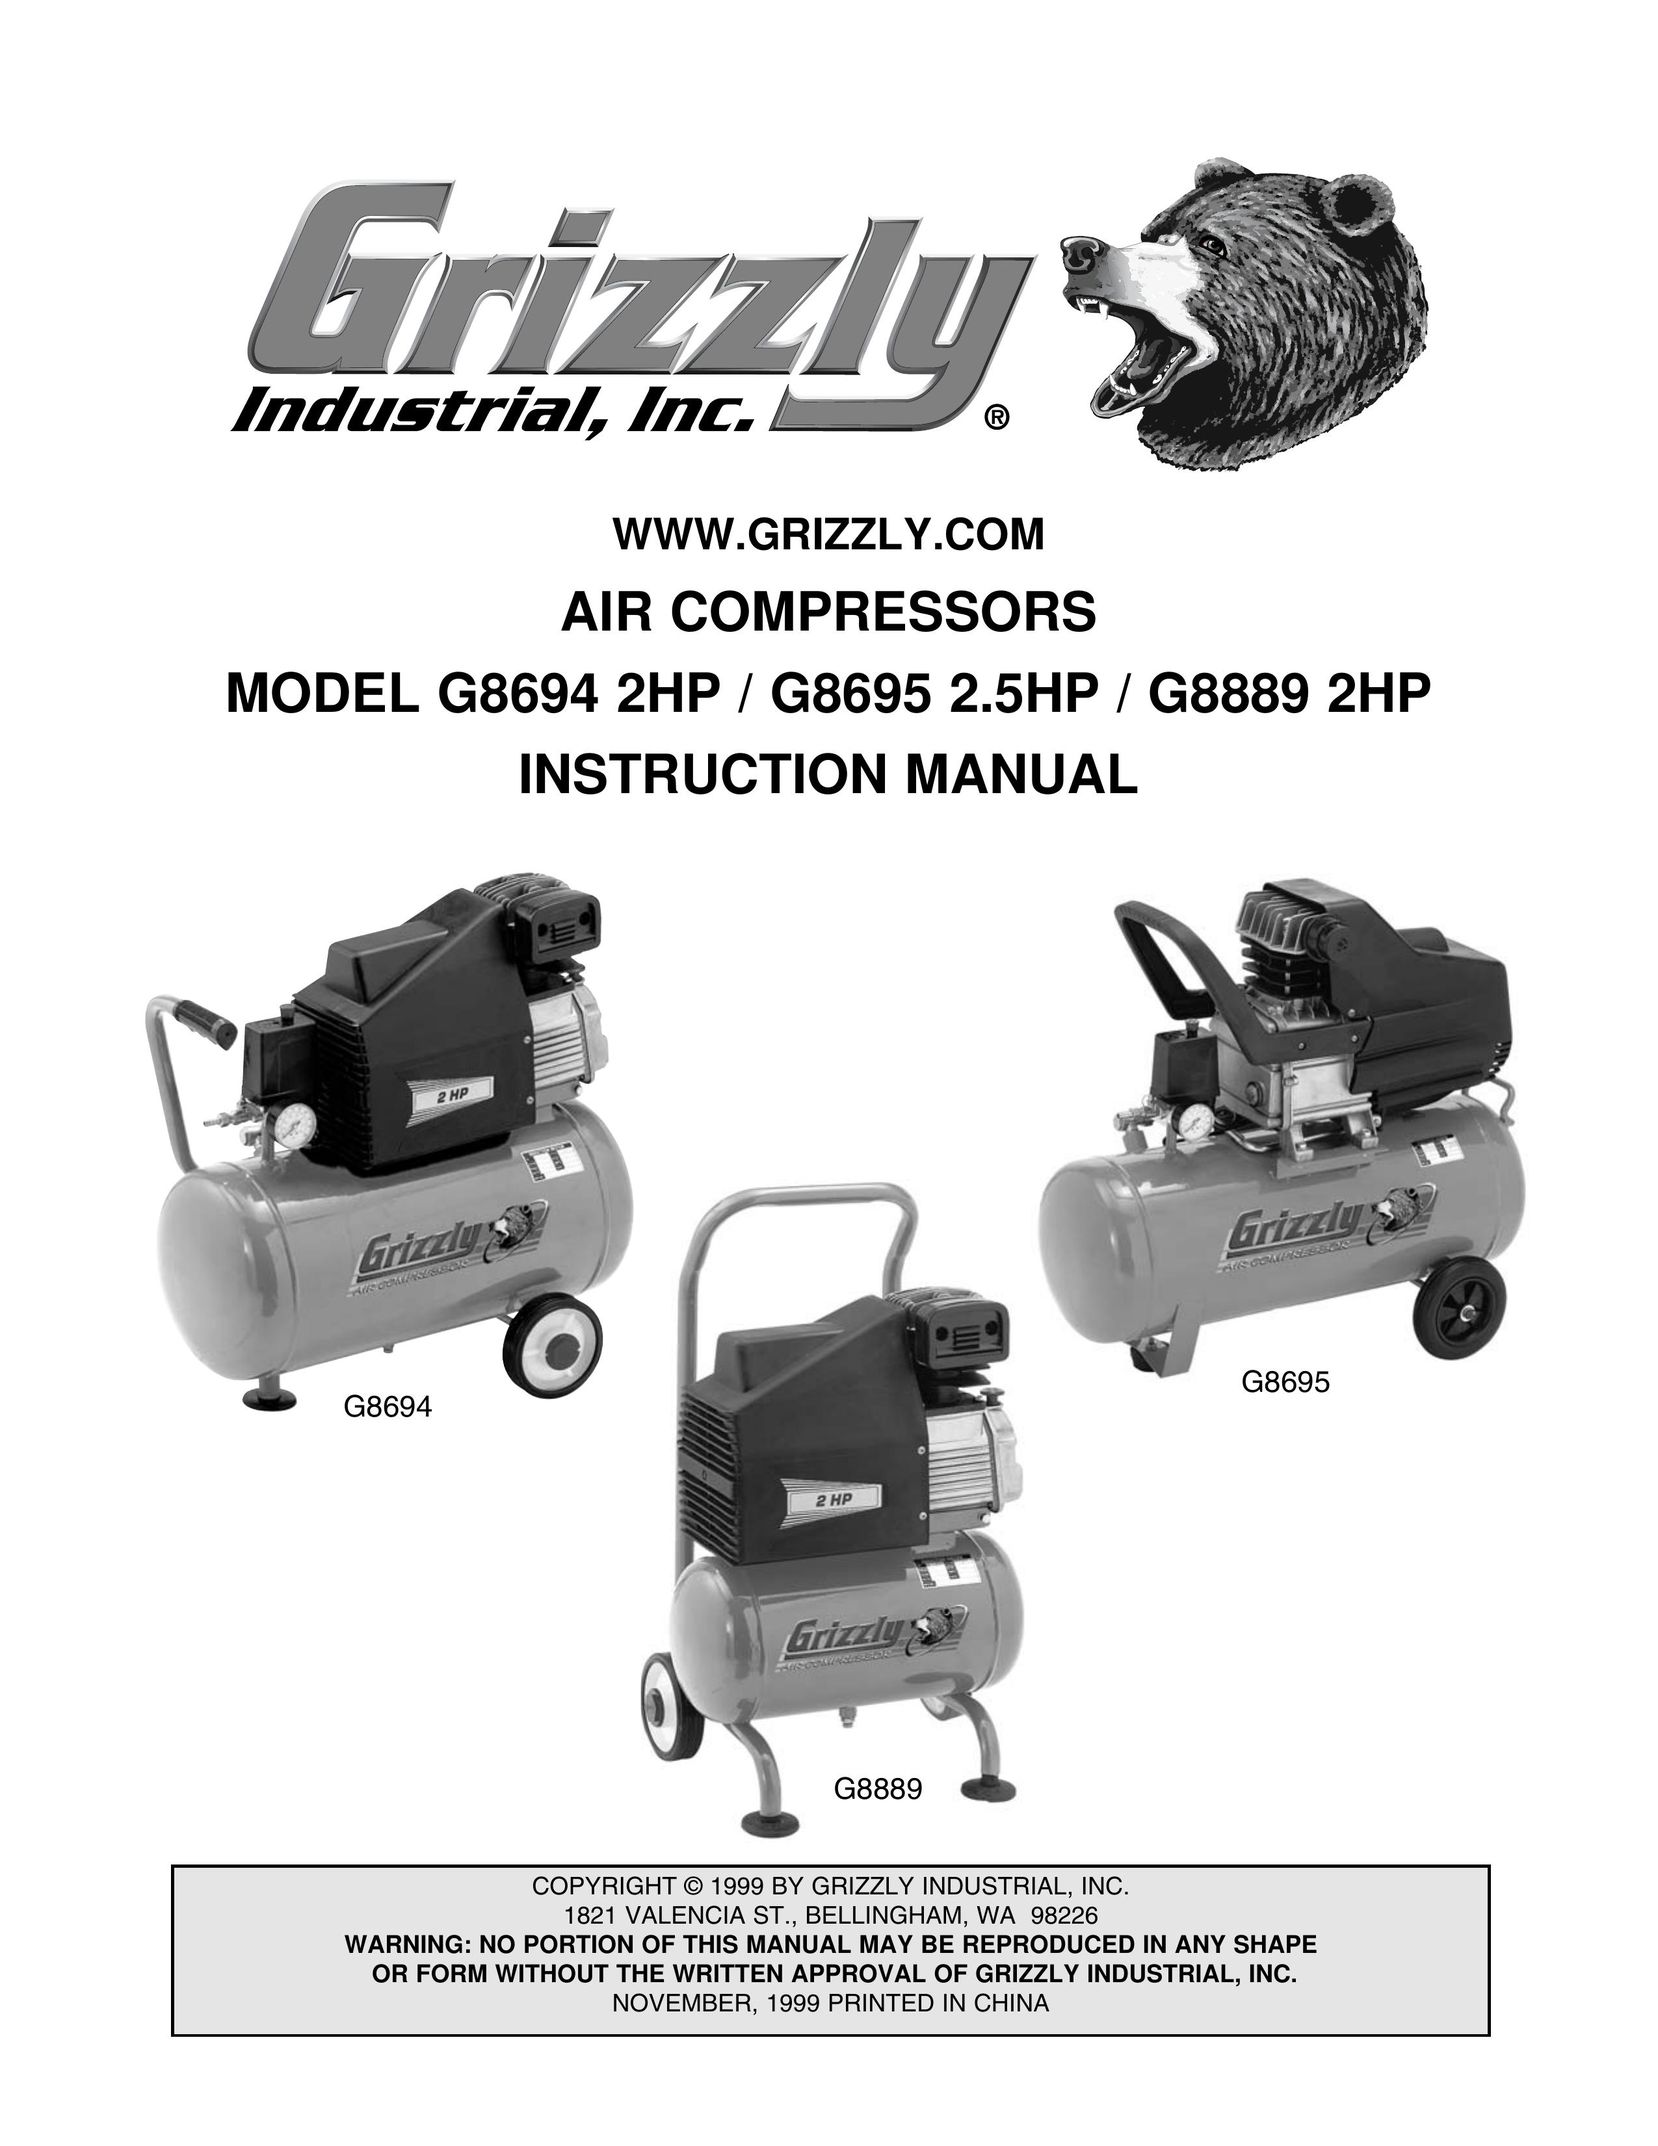 Grizzly G8889 Air Compressor User Manual